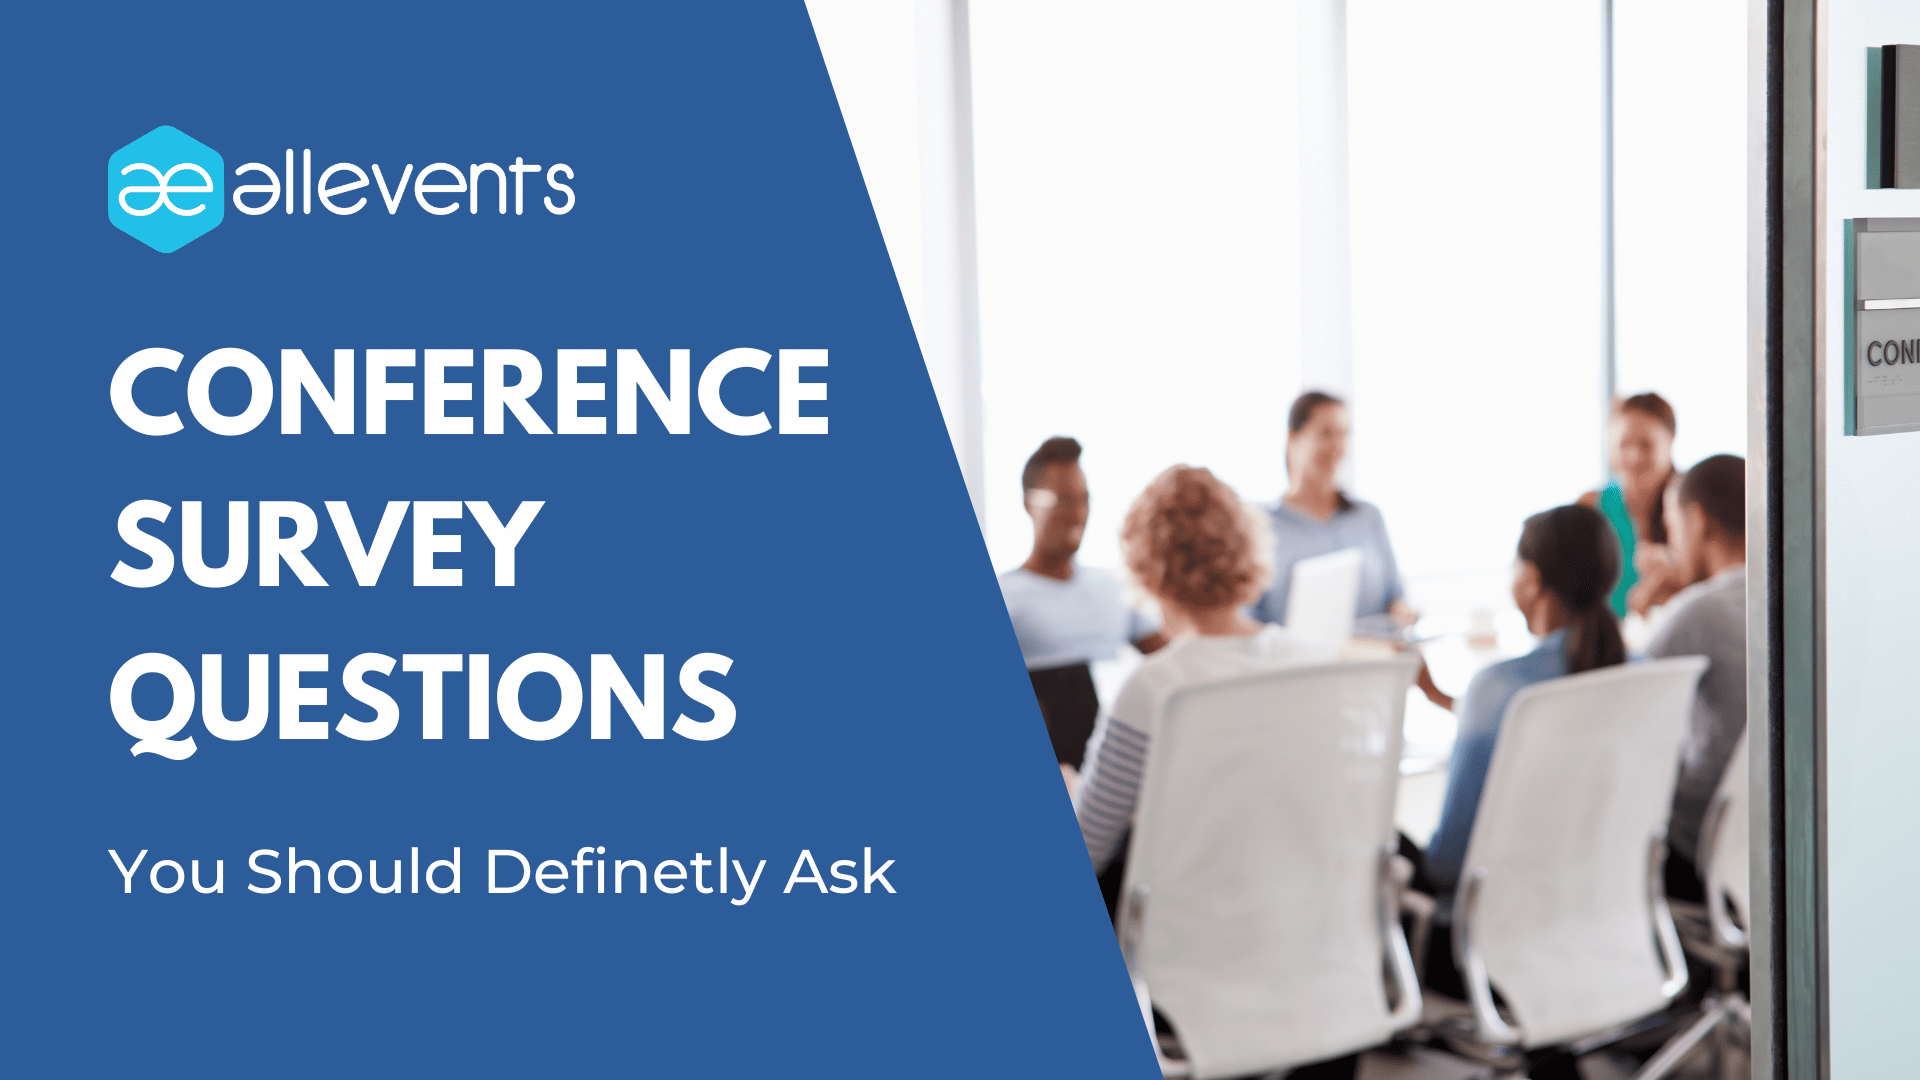 Conference Survey Questions to Aks